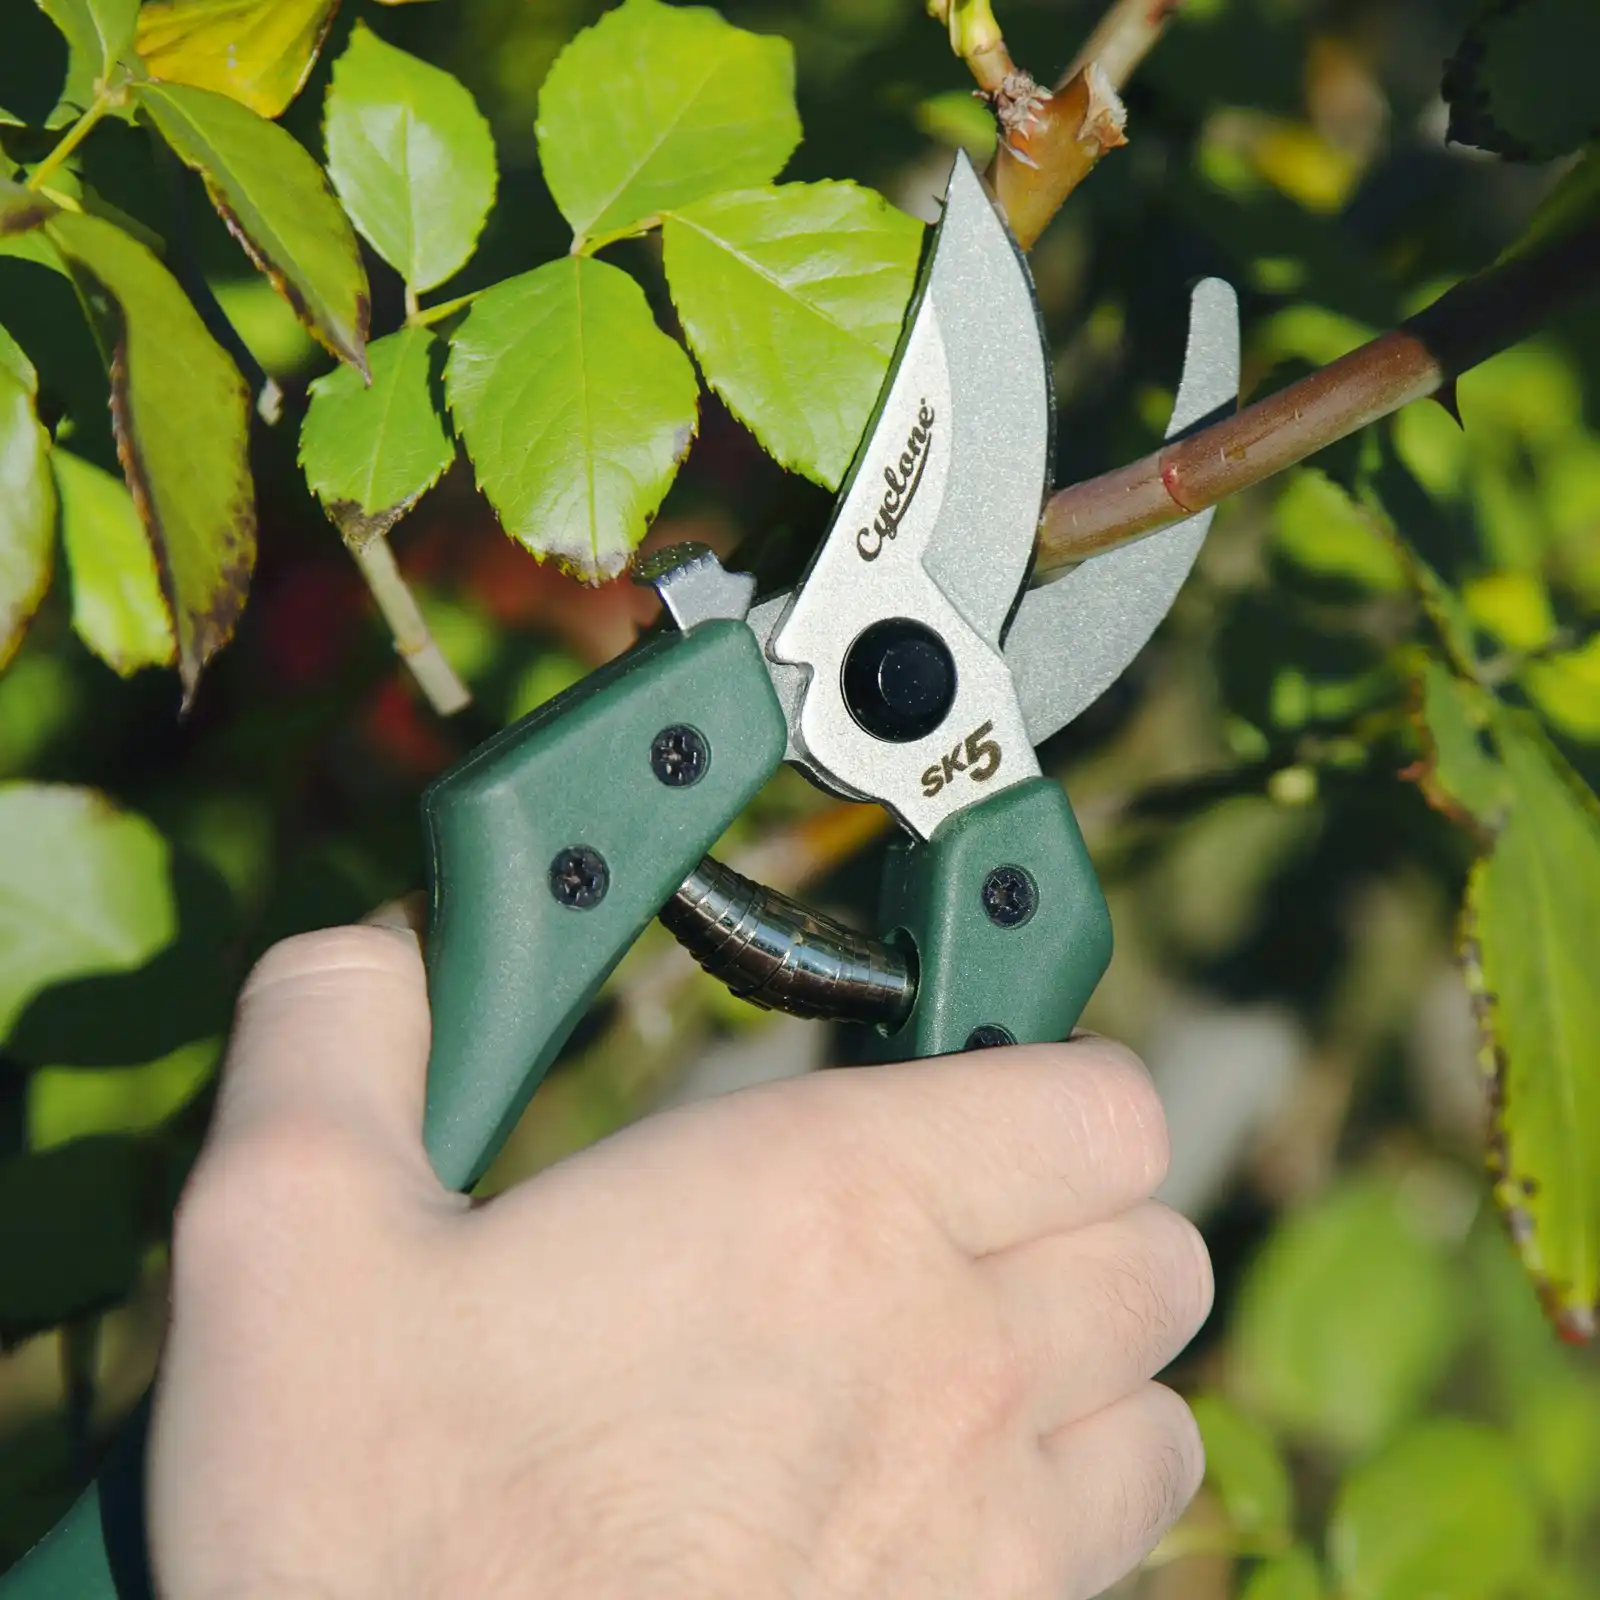 Cyclone Quick Release Bypass Pruner 200mm Plant/Flowers Cutting/Gardening